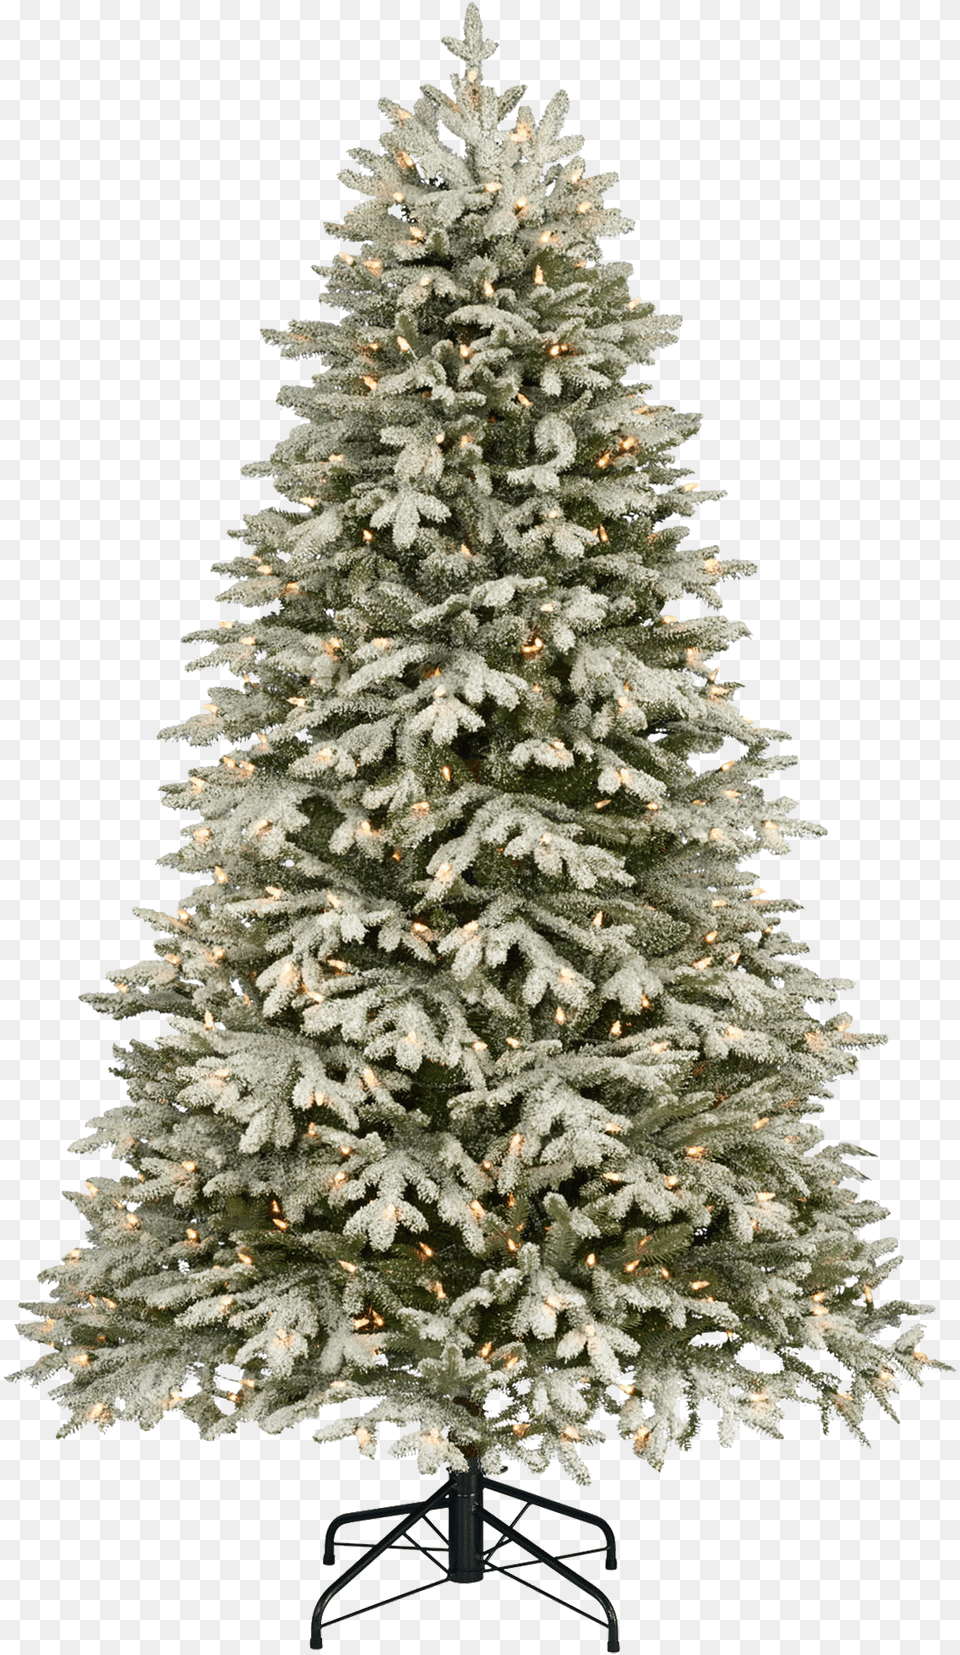 Christmas Tree Image Merry Christmas 2019 Words, Plant, Christmas Decorations, Festival, Pine Png